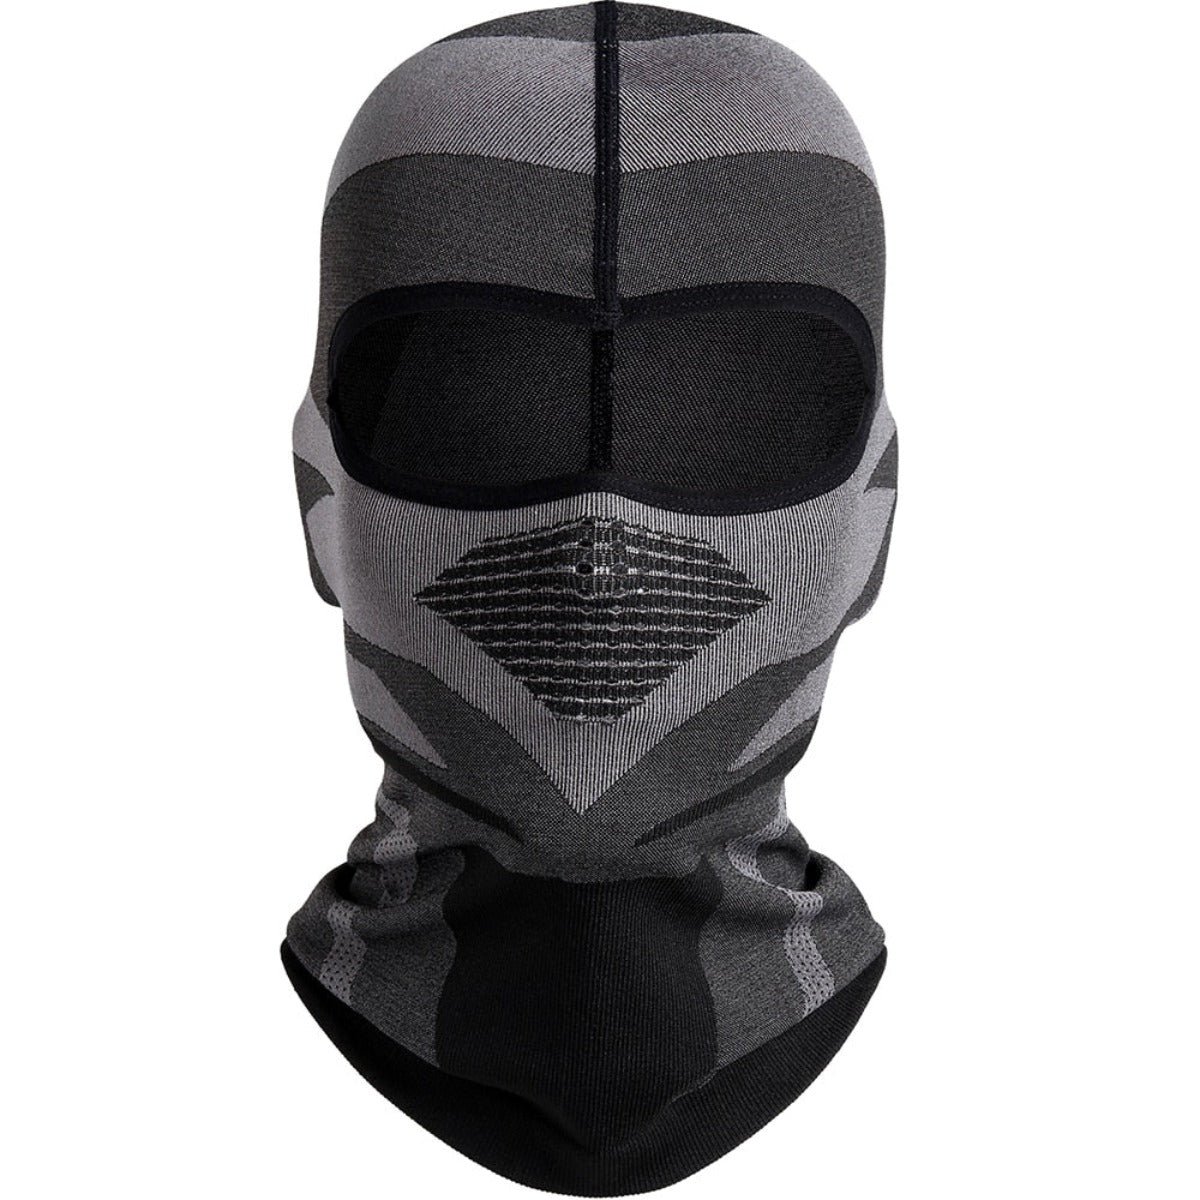 A grey and black Breathable Motorcycle Full Face Cover on a white background.